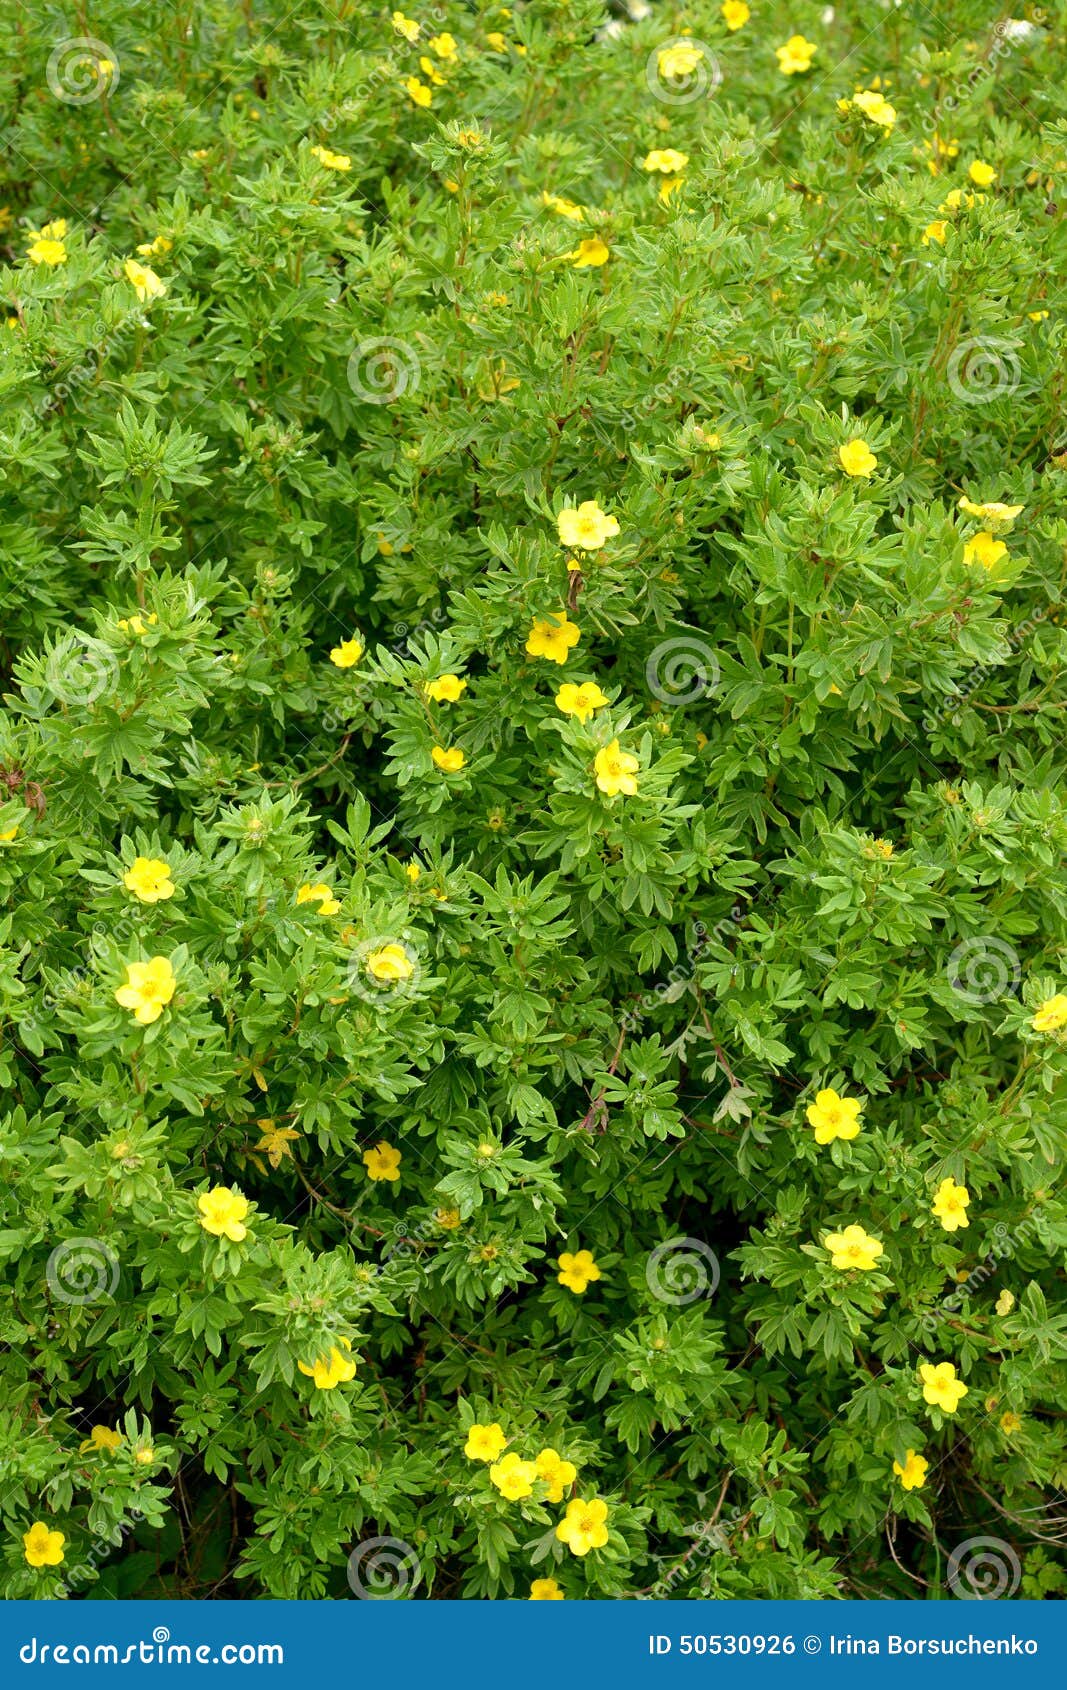 the blossoming cinquefoil shrubby (kuril tea shrubby, a silverweed shrubby) (pentaphylloides fruticosa (l.) o.schwarz)